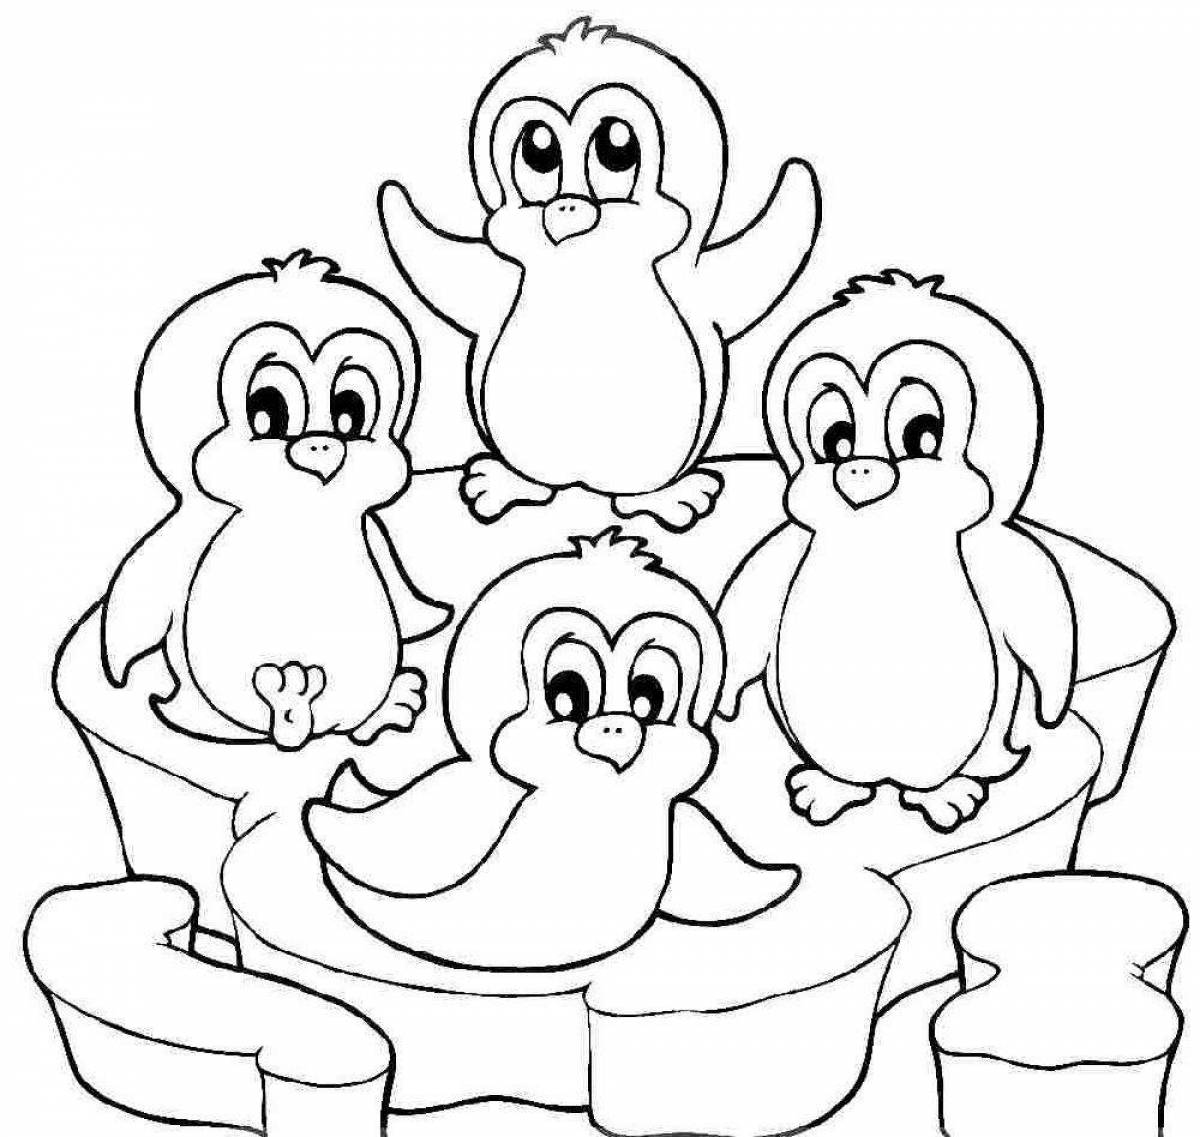 Great penguin coloring book for kids